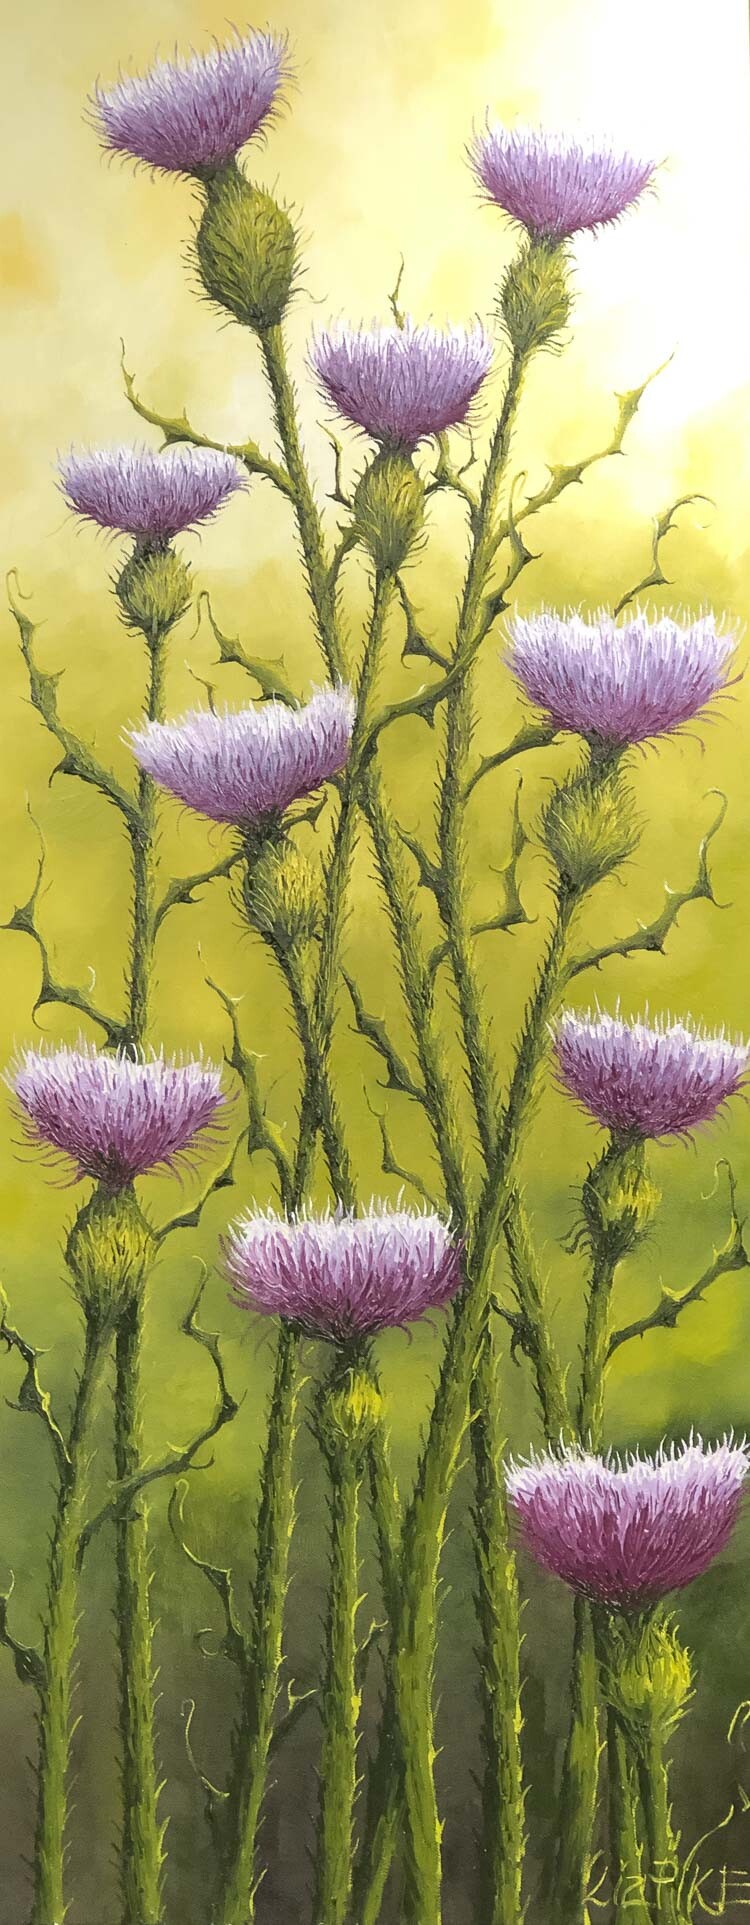 “Ten Thistles’’ by Liz Pike. Photo courtesy Pike Art Gallery